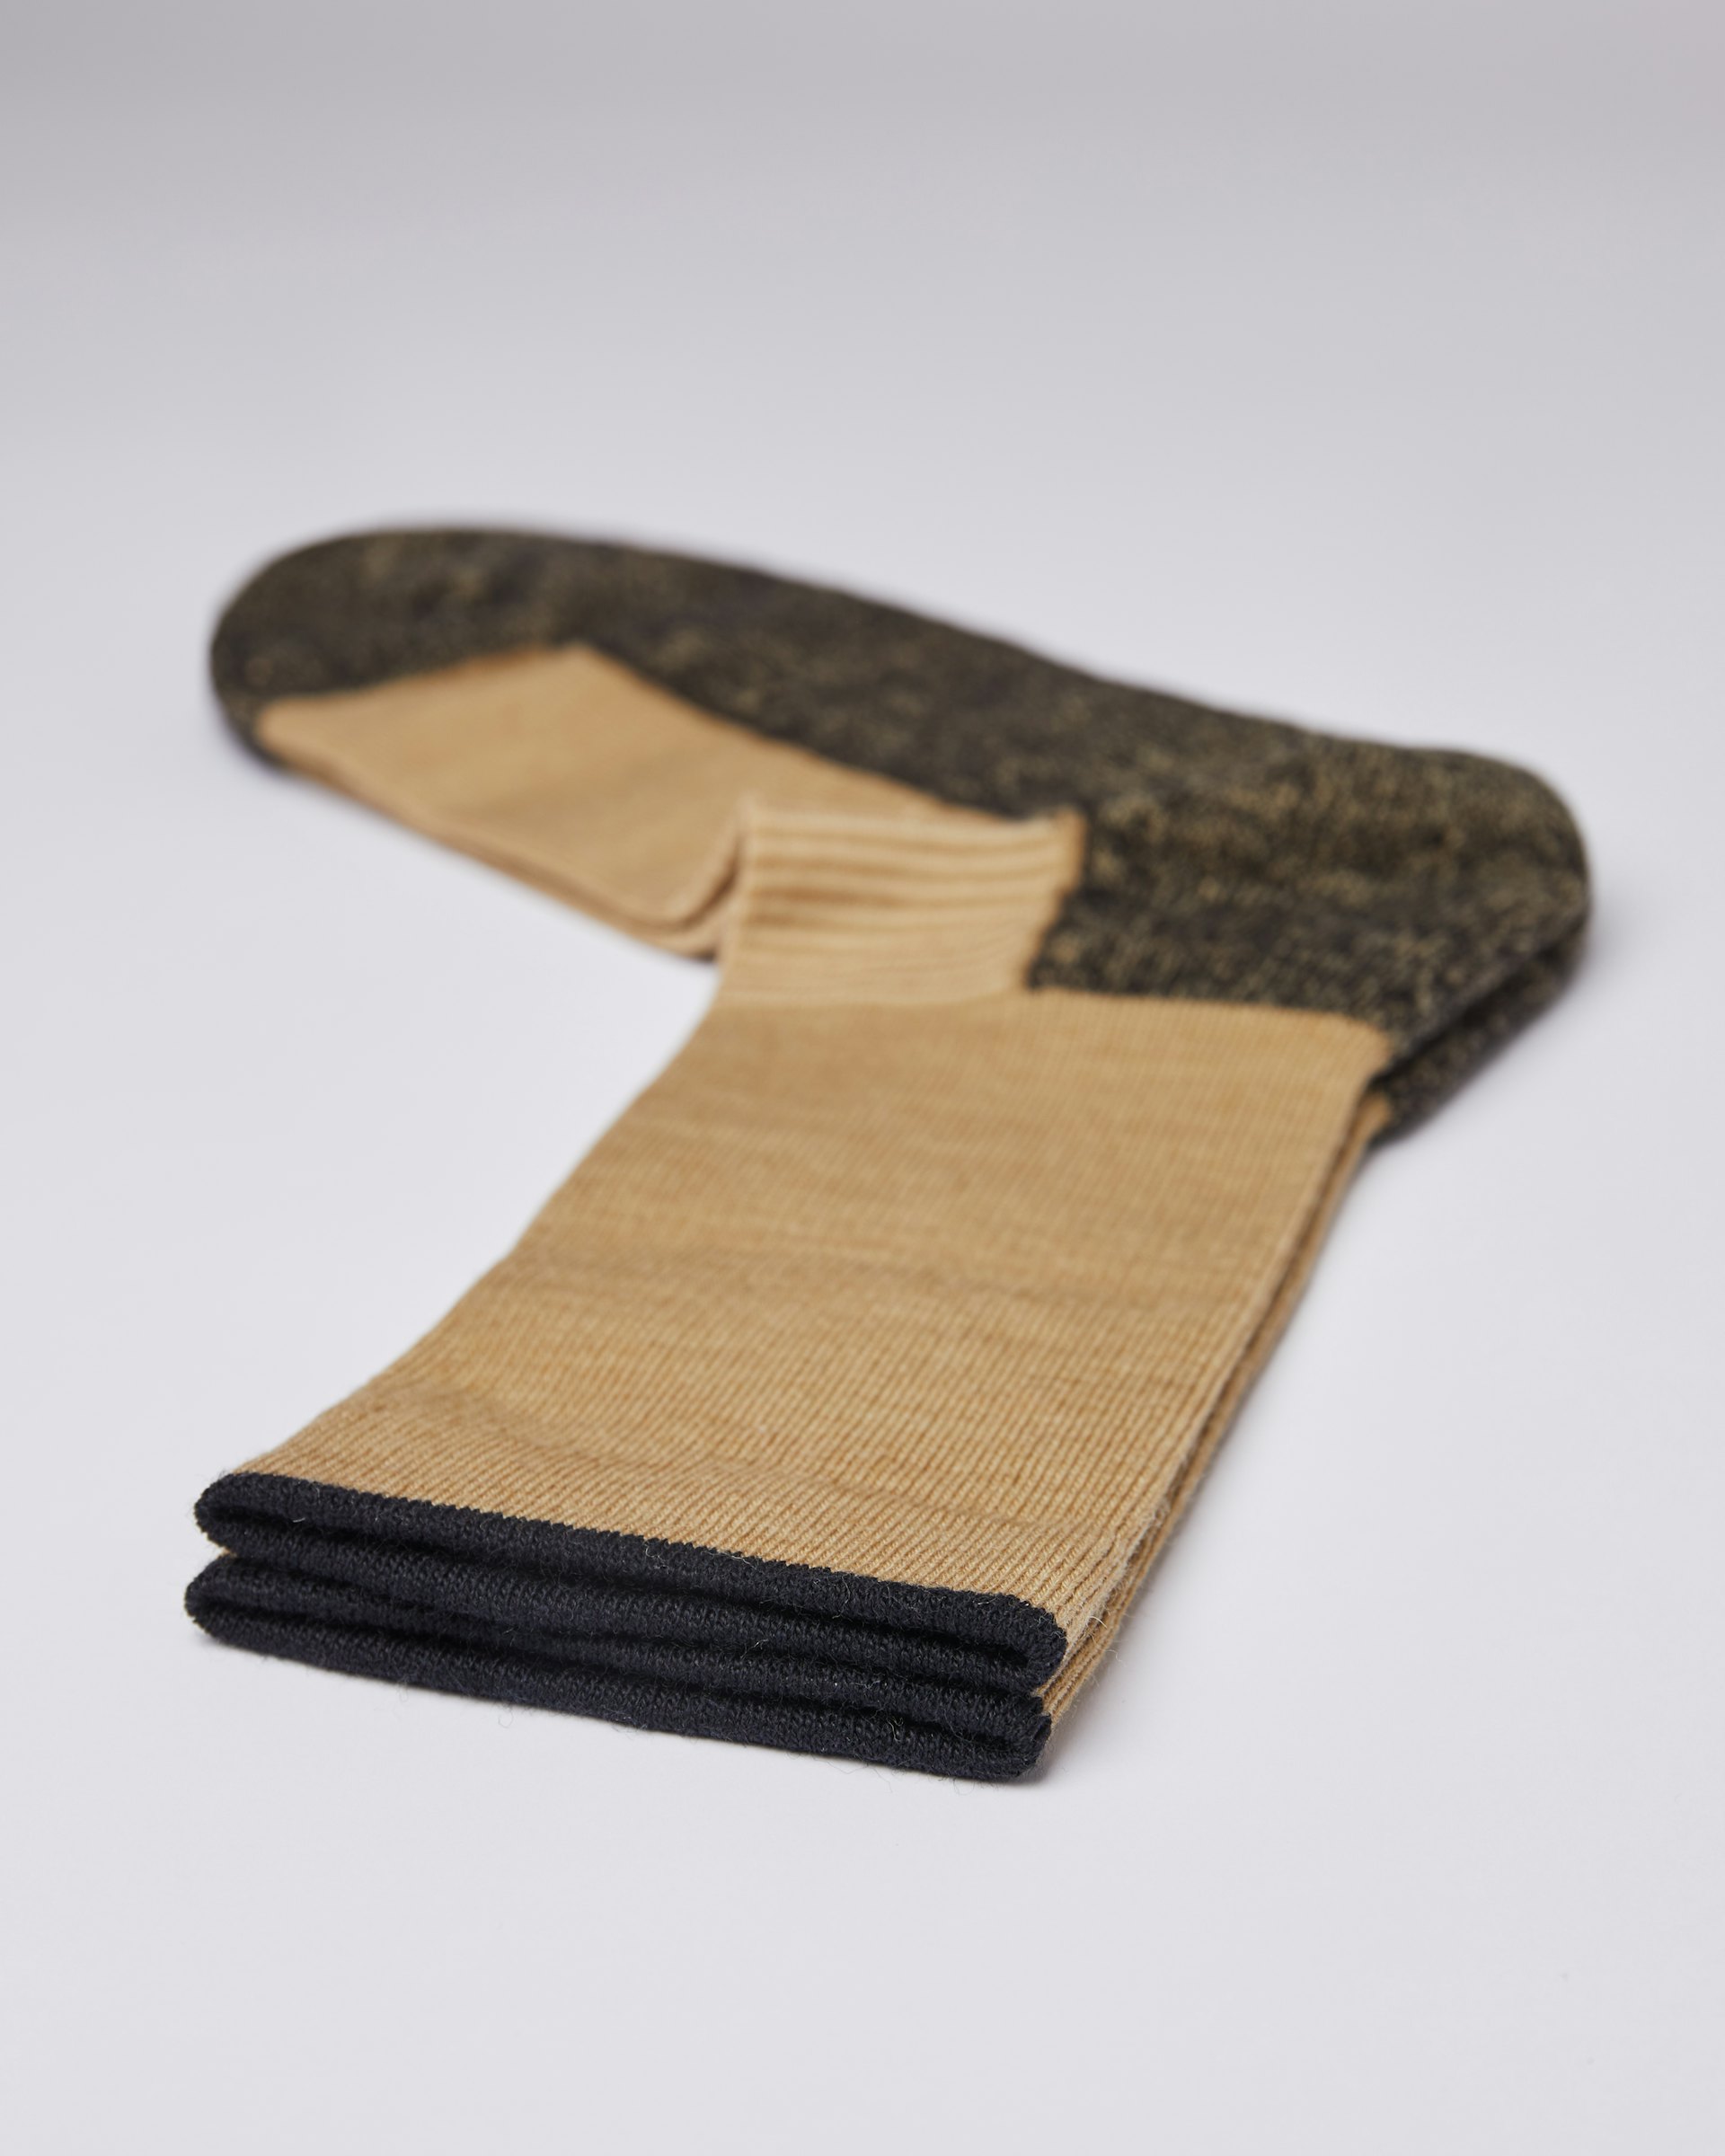 Wool sock belongs to the category Items and is in color black & bronze (2 of 3)